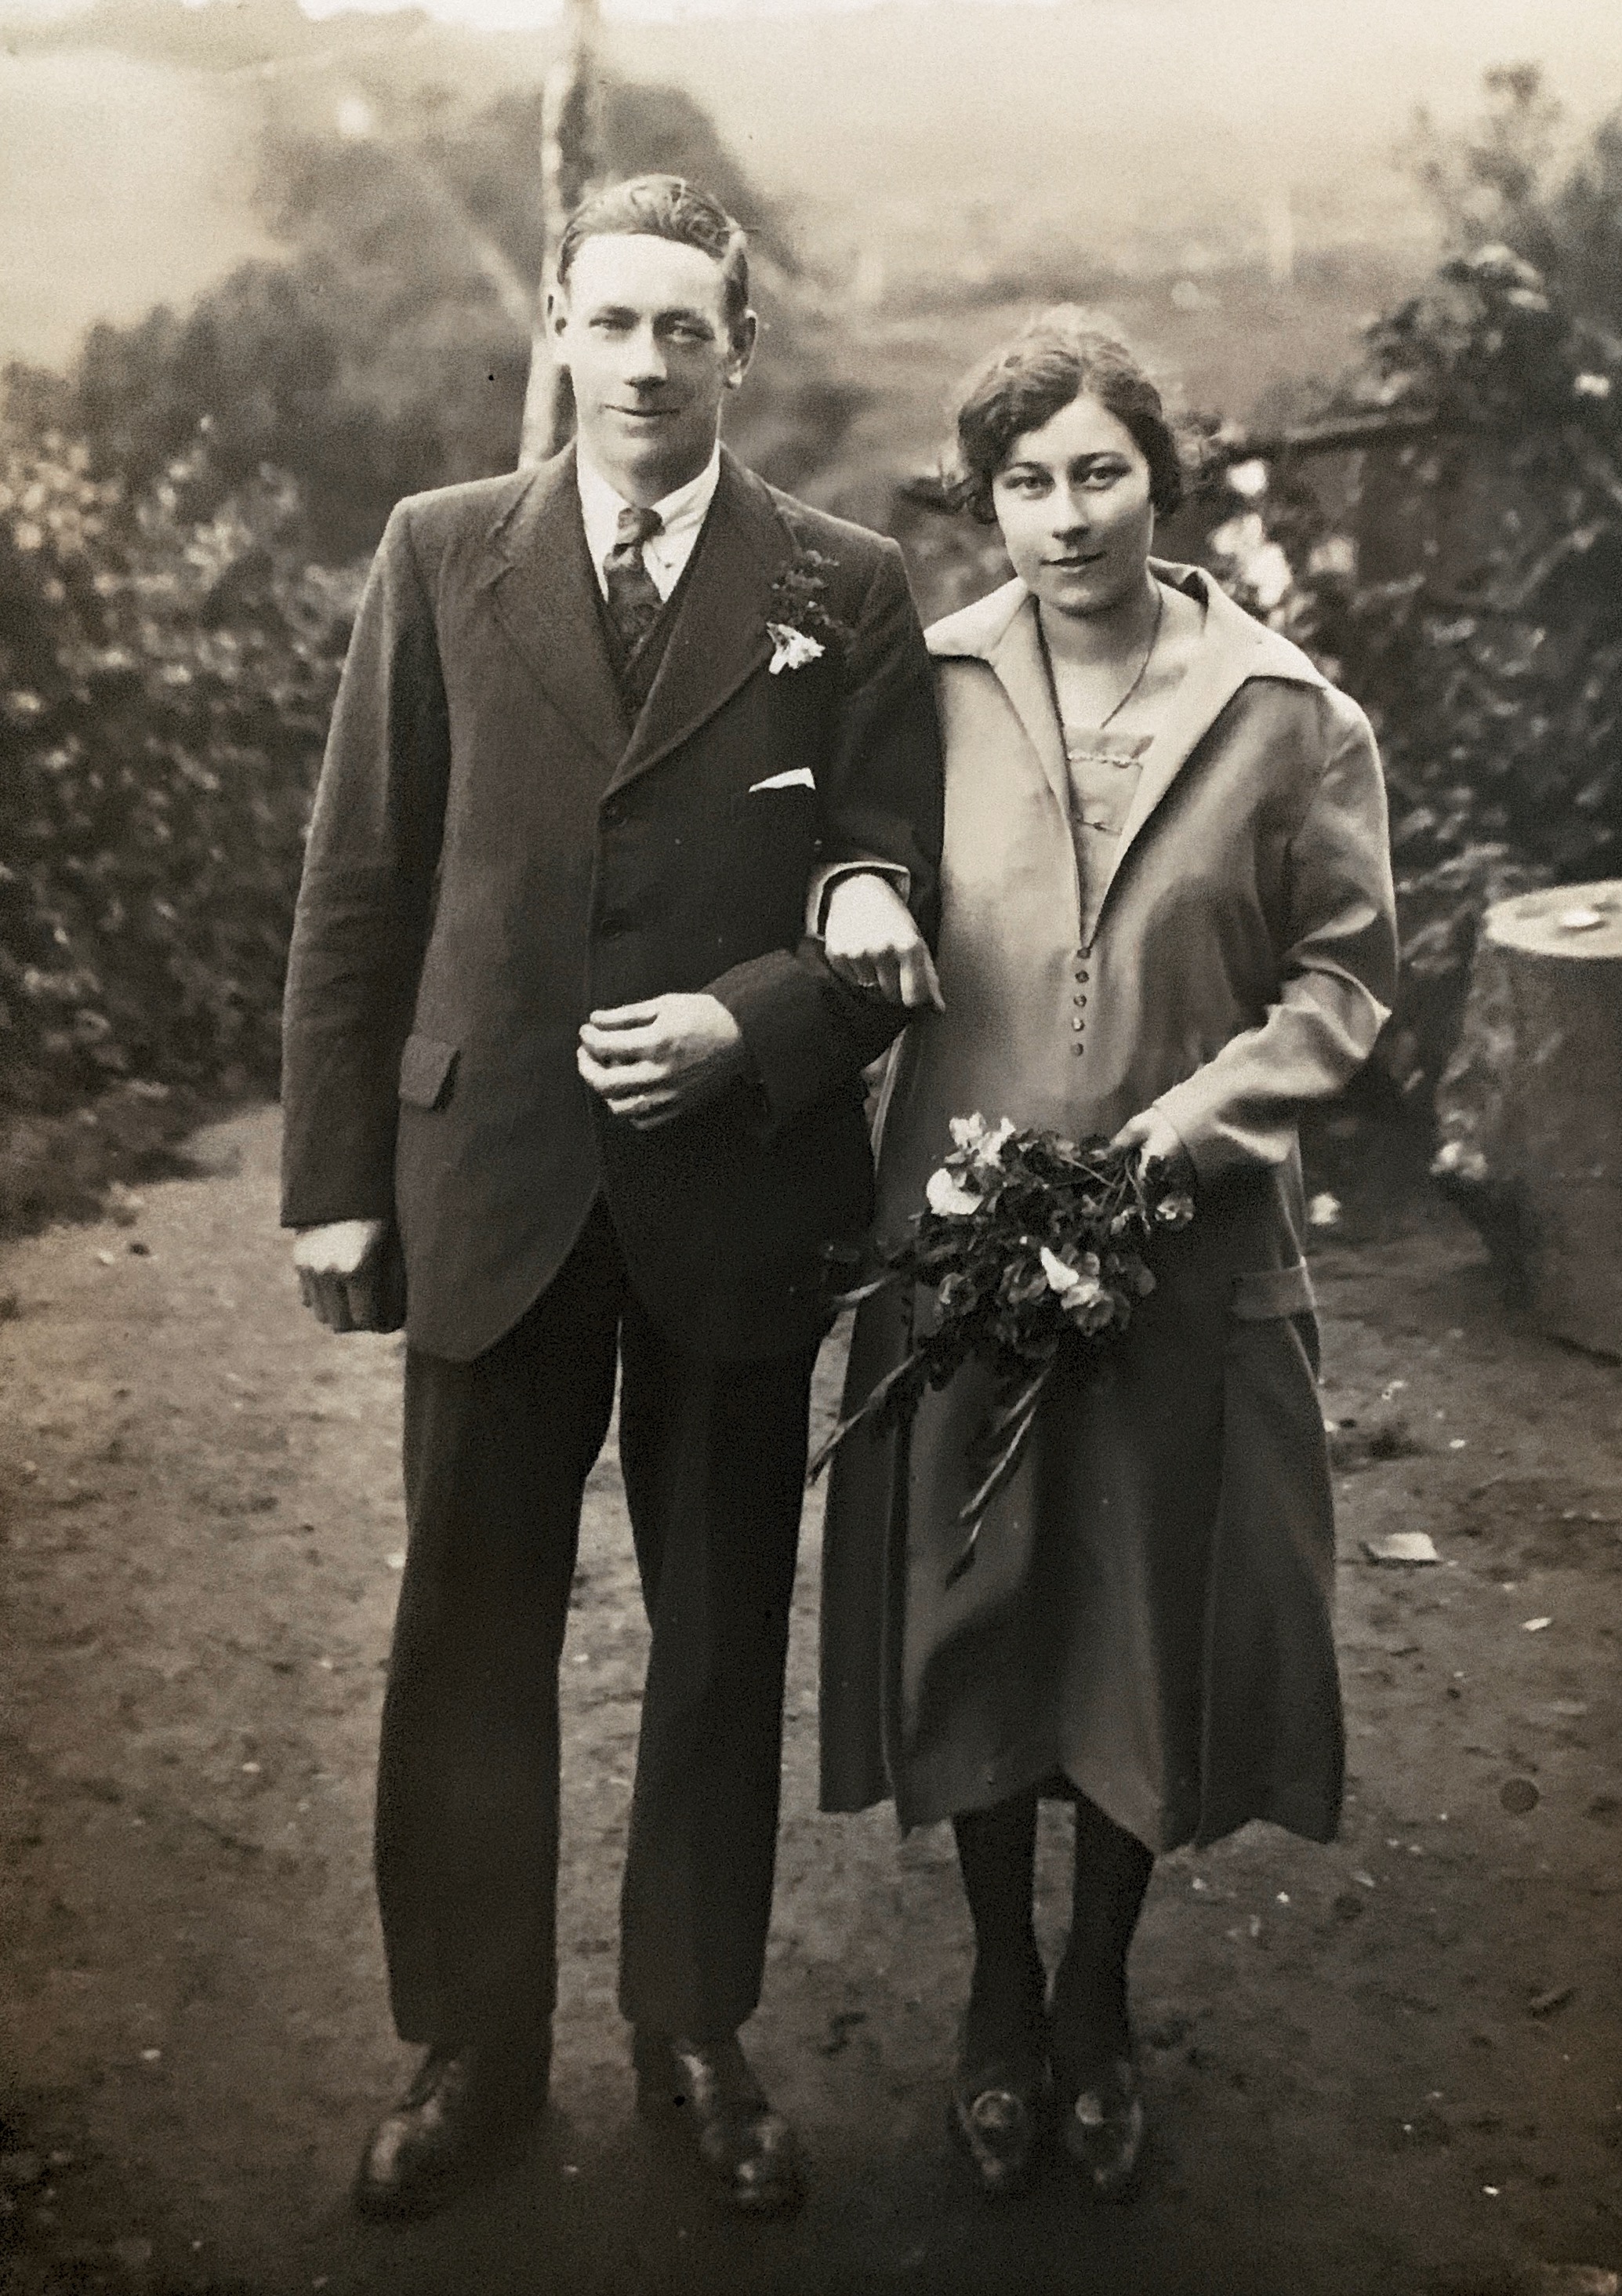 Lottie and Edward May on their wedding day 13/8/1927